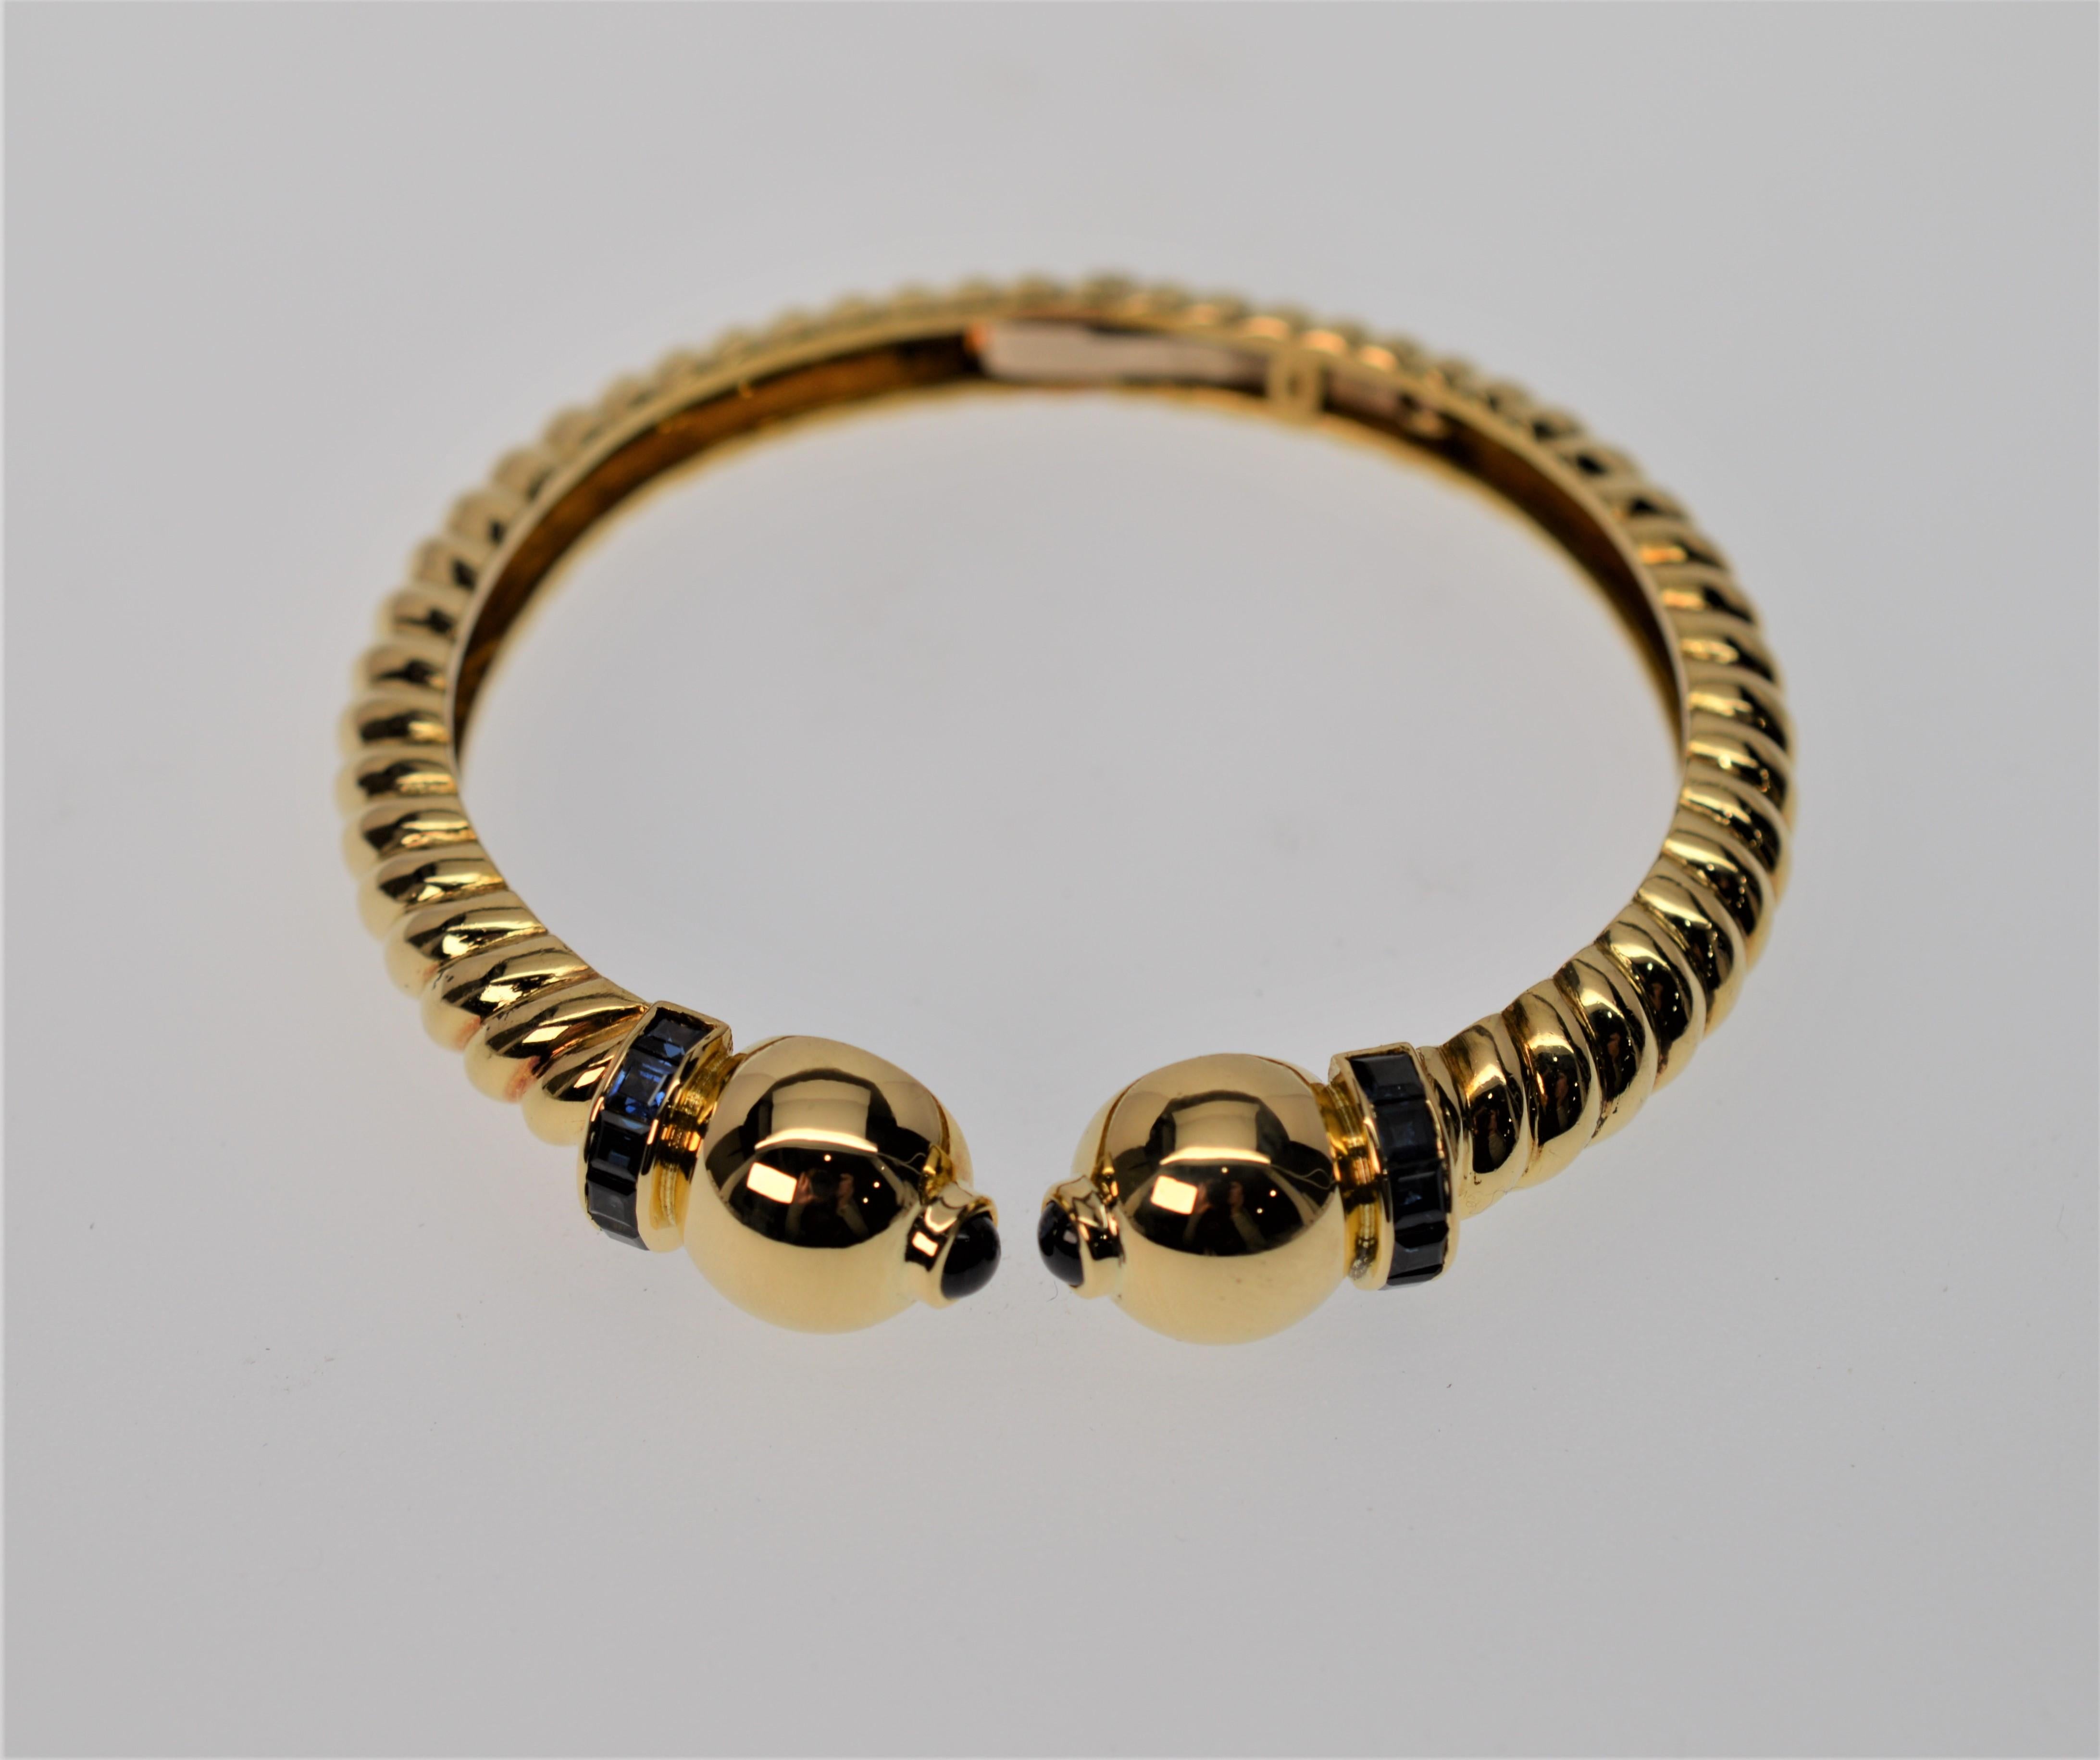 European, circa post war late 1940s, 18K Yellow Gold Cuff Bracelet with twist rope style finished with ball cap design adorned with Blue Sapphire. 
Measures 2-1/4 inches with .32 cts Blue Sapphire and 24.0 pennyweight of .750 Gold. In unusually fine